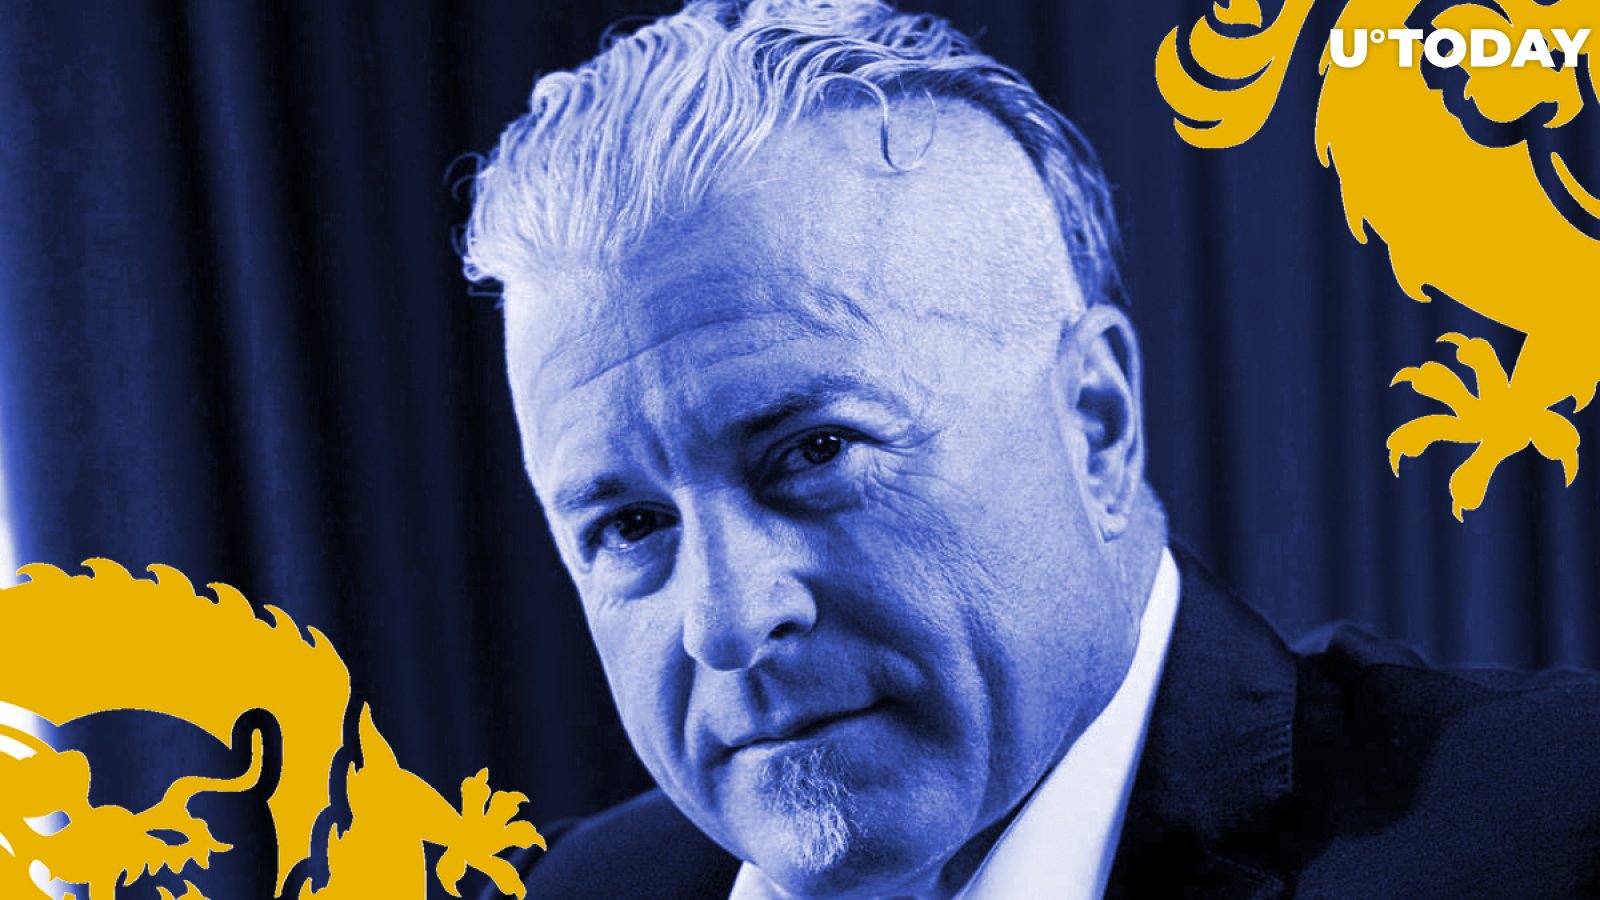 Bitcoin SV Price Keeps Pumping as Calvin Ayre Predicts BSV to Absorb All Other Crypto